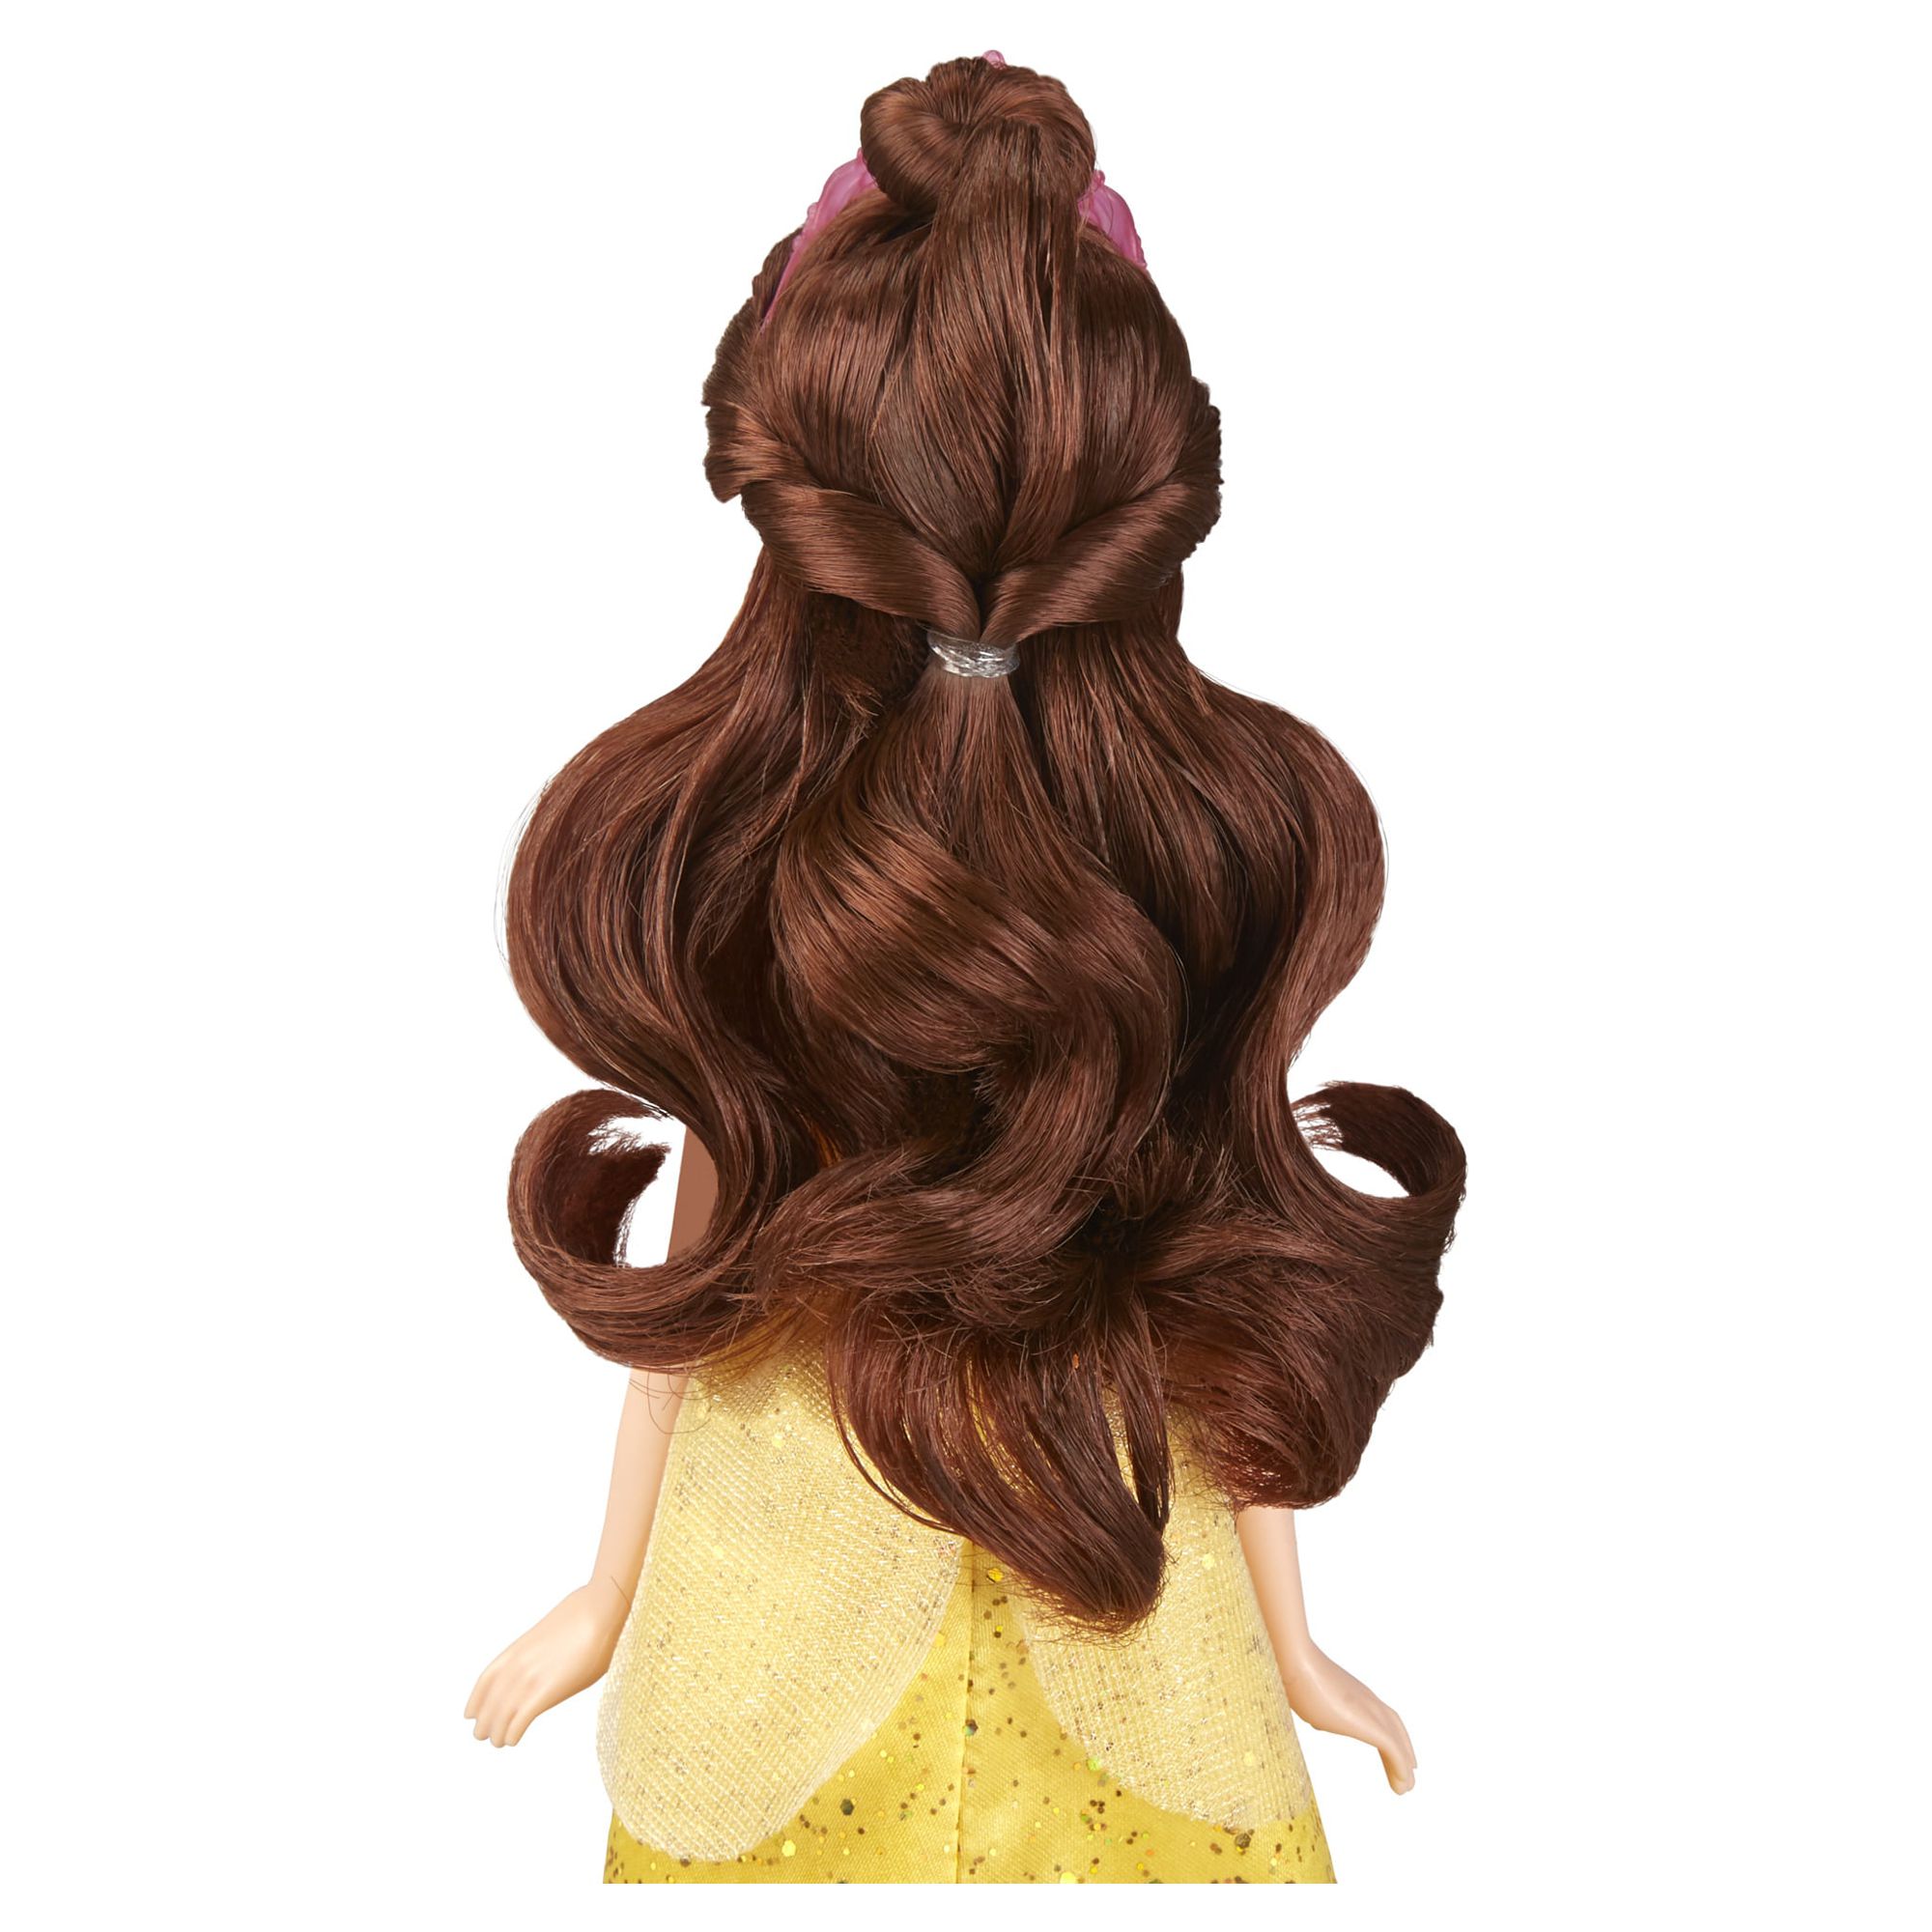 Disney Princess Royal Shimmer Belle with Sparkly Skirt, Includes Tiara and Shoes - image 11 of 16